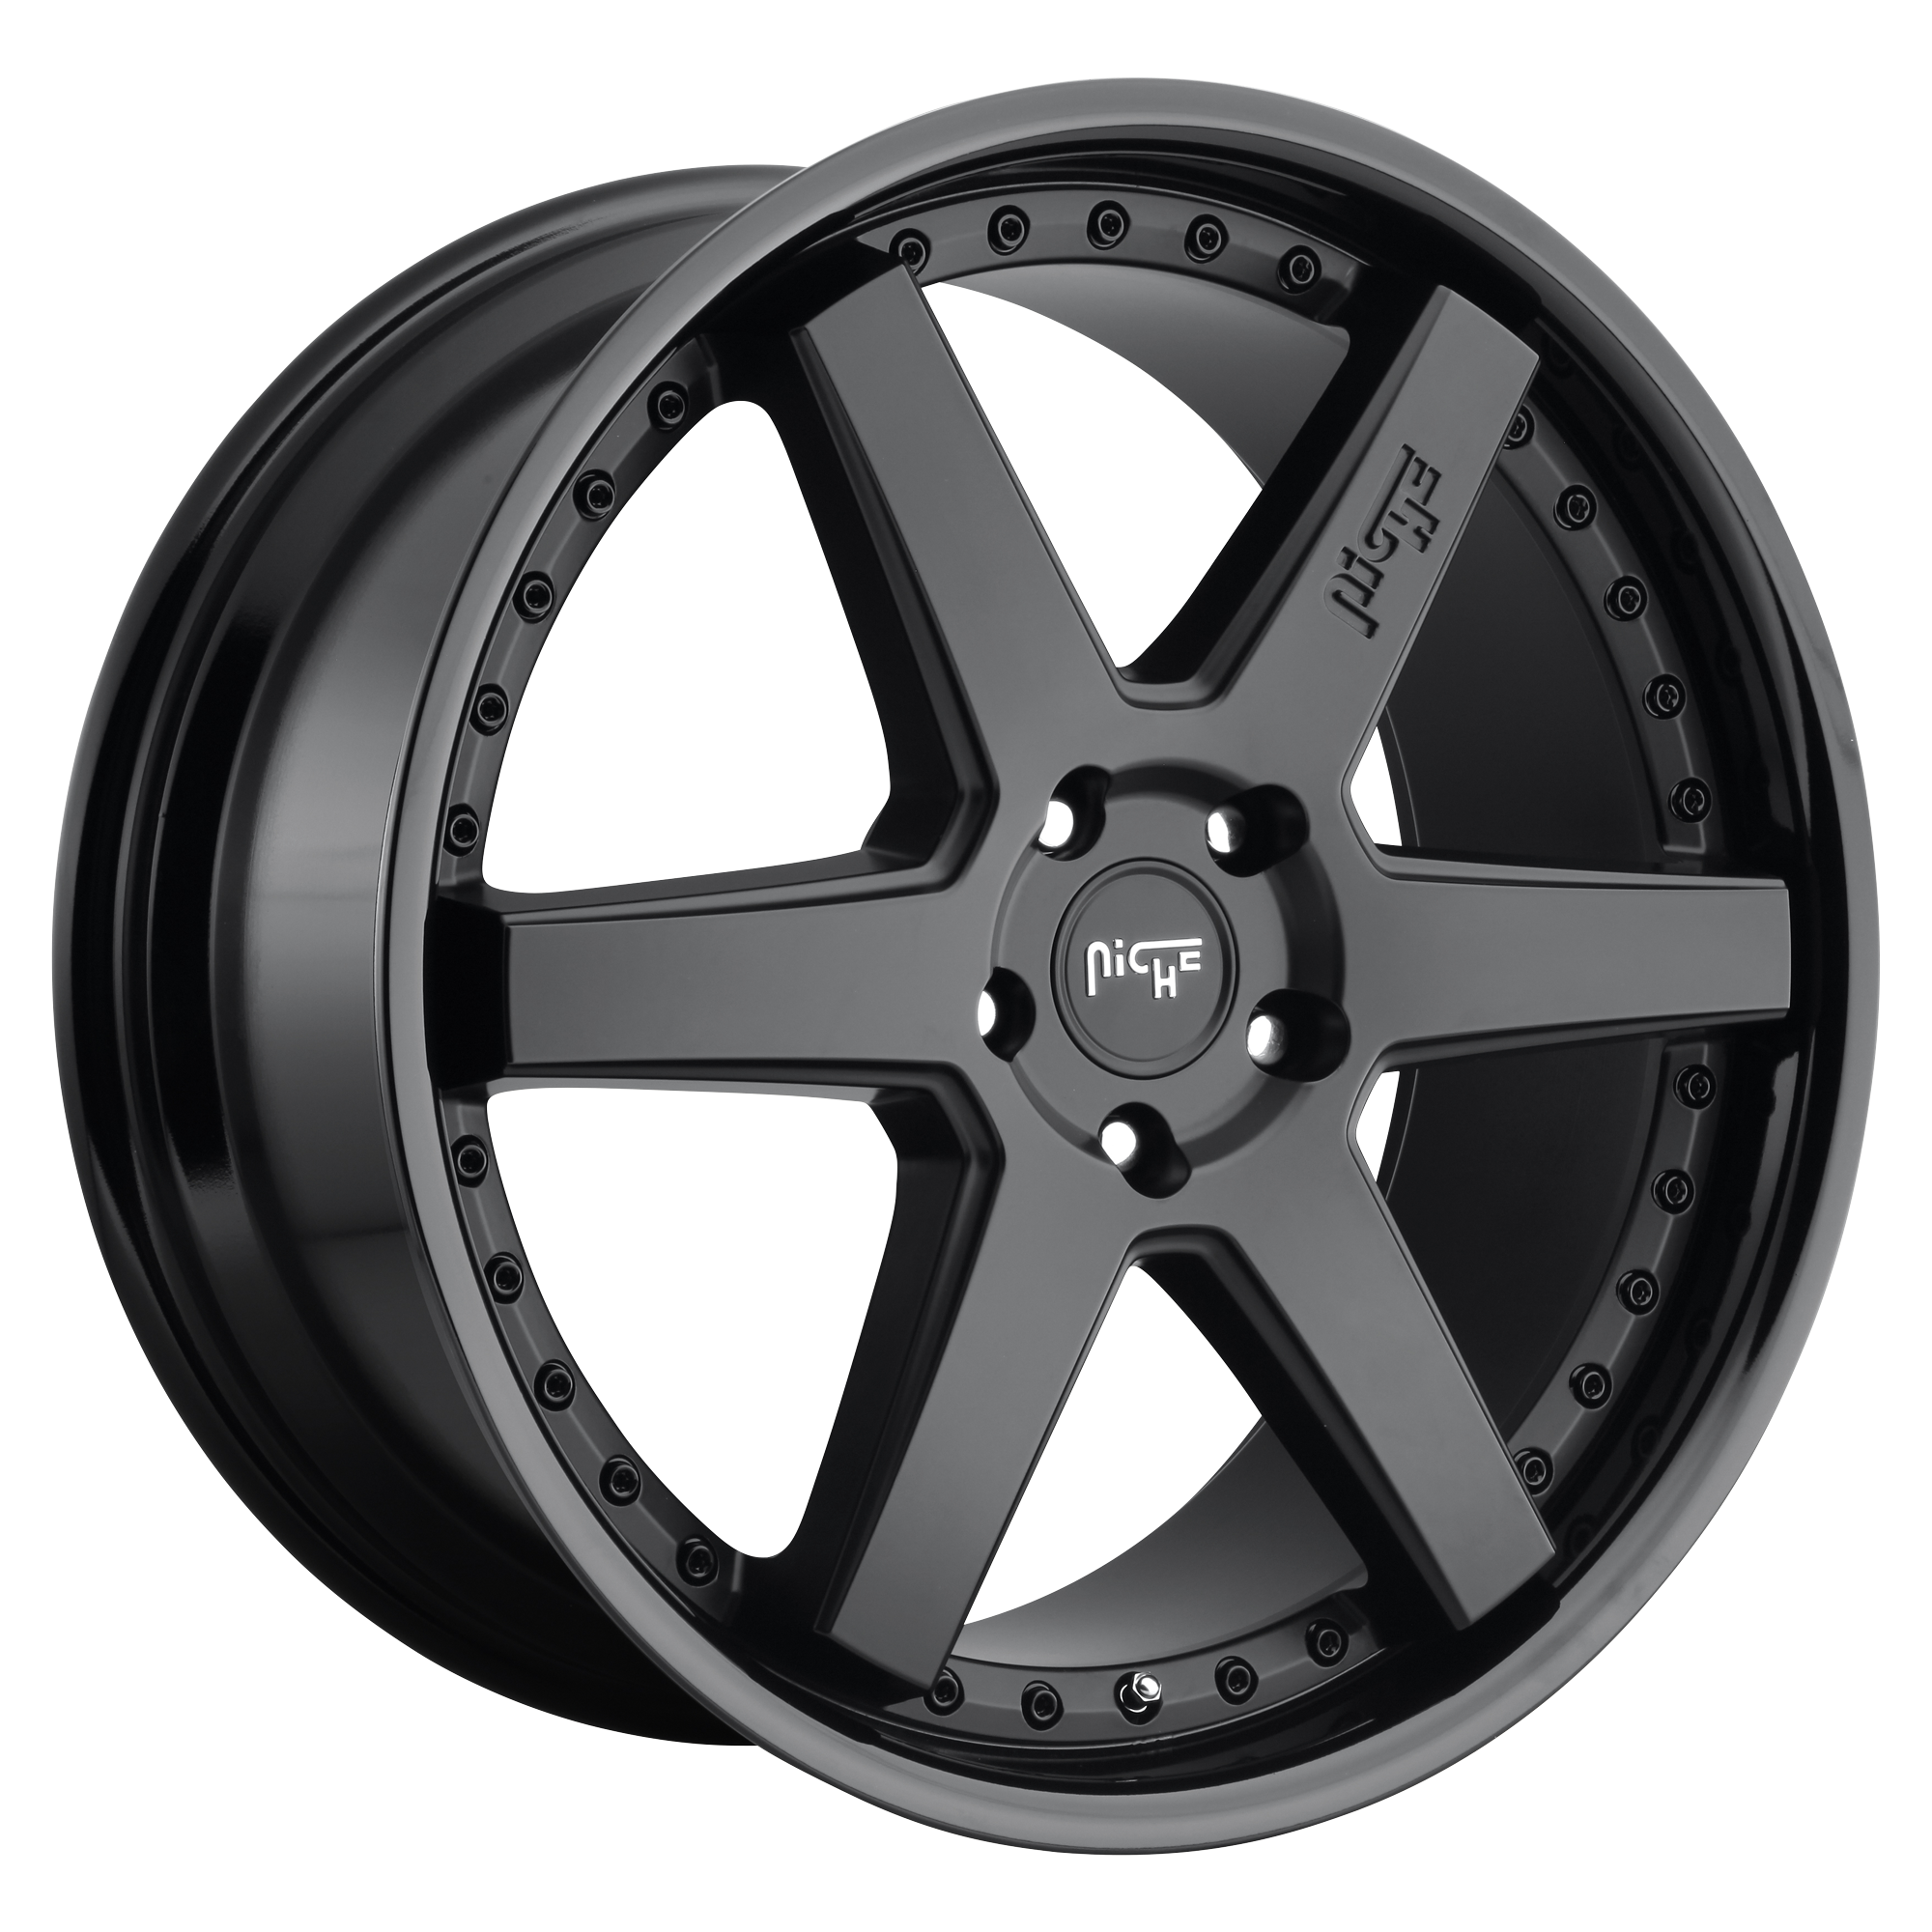 ALTAIR 18x8.5 5x112.00 GLOSS BLACK MATTE BLACK (42 mm) - Tires and Engine Performance